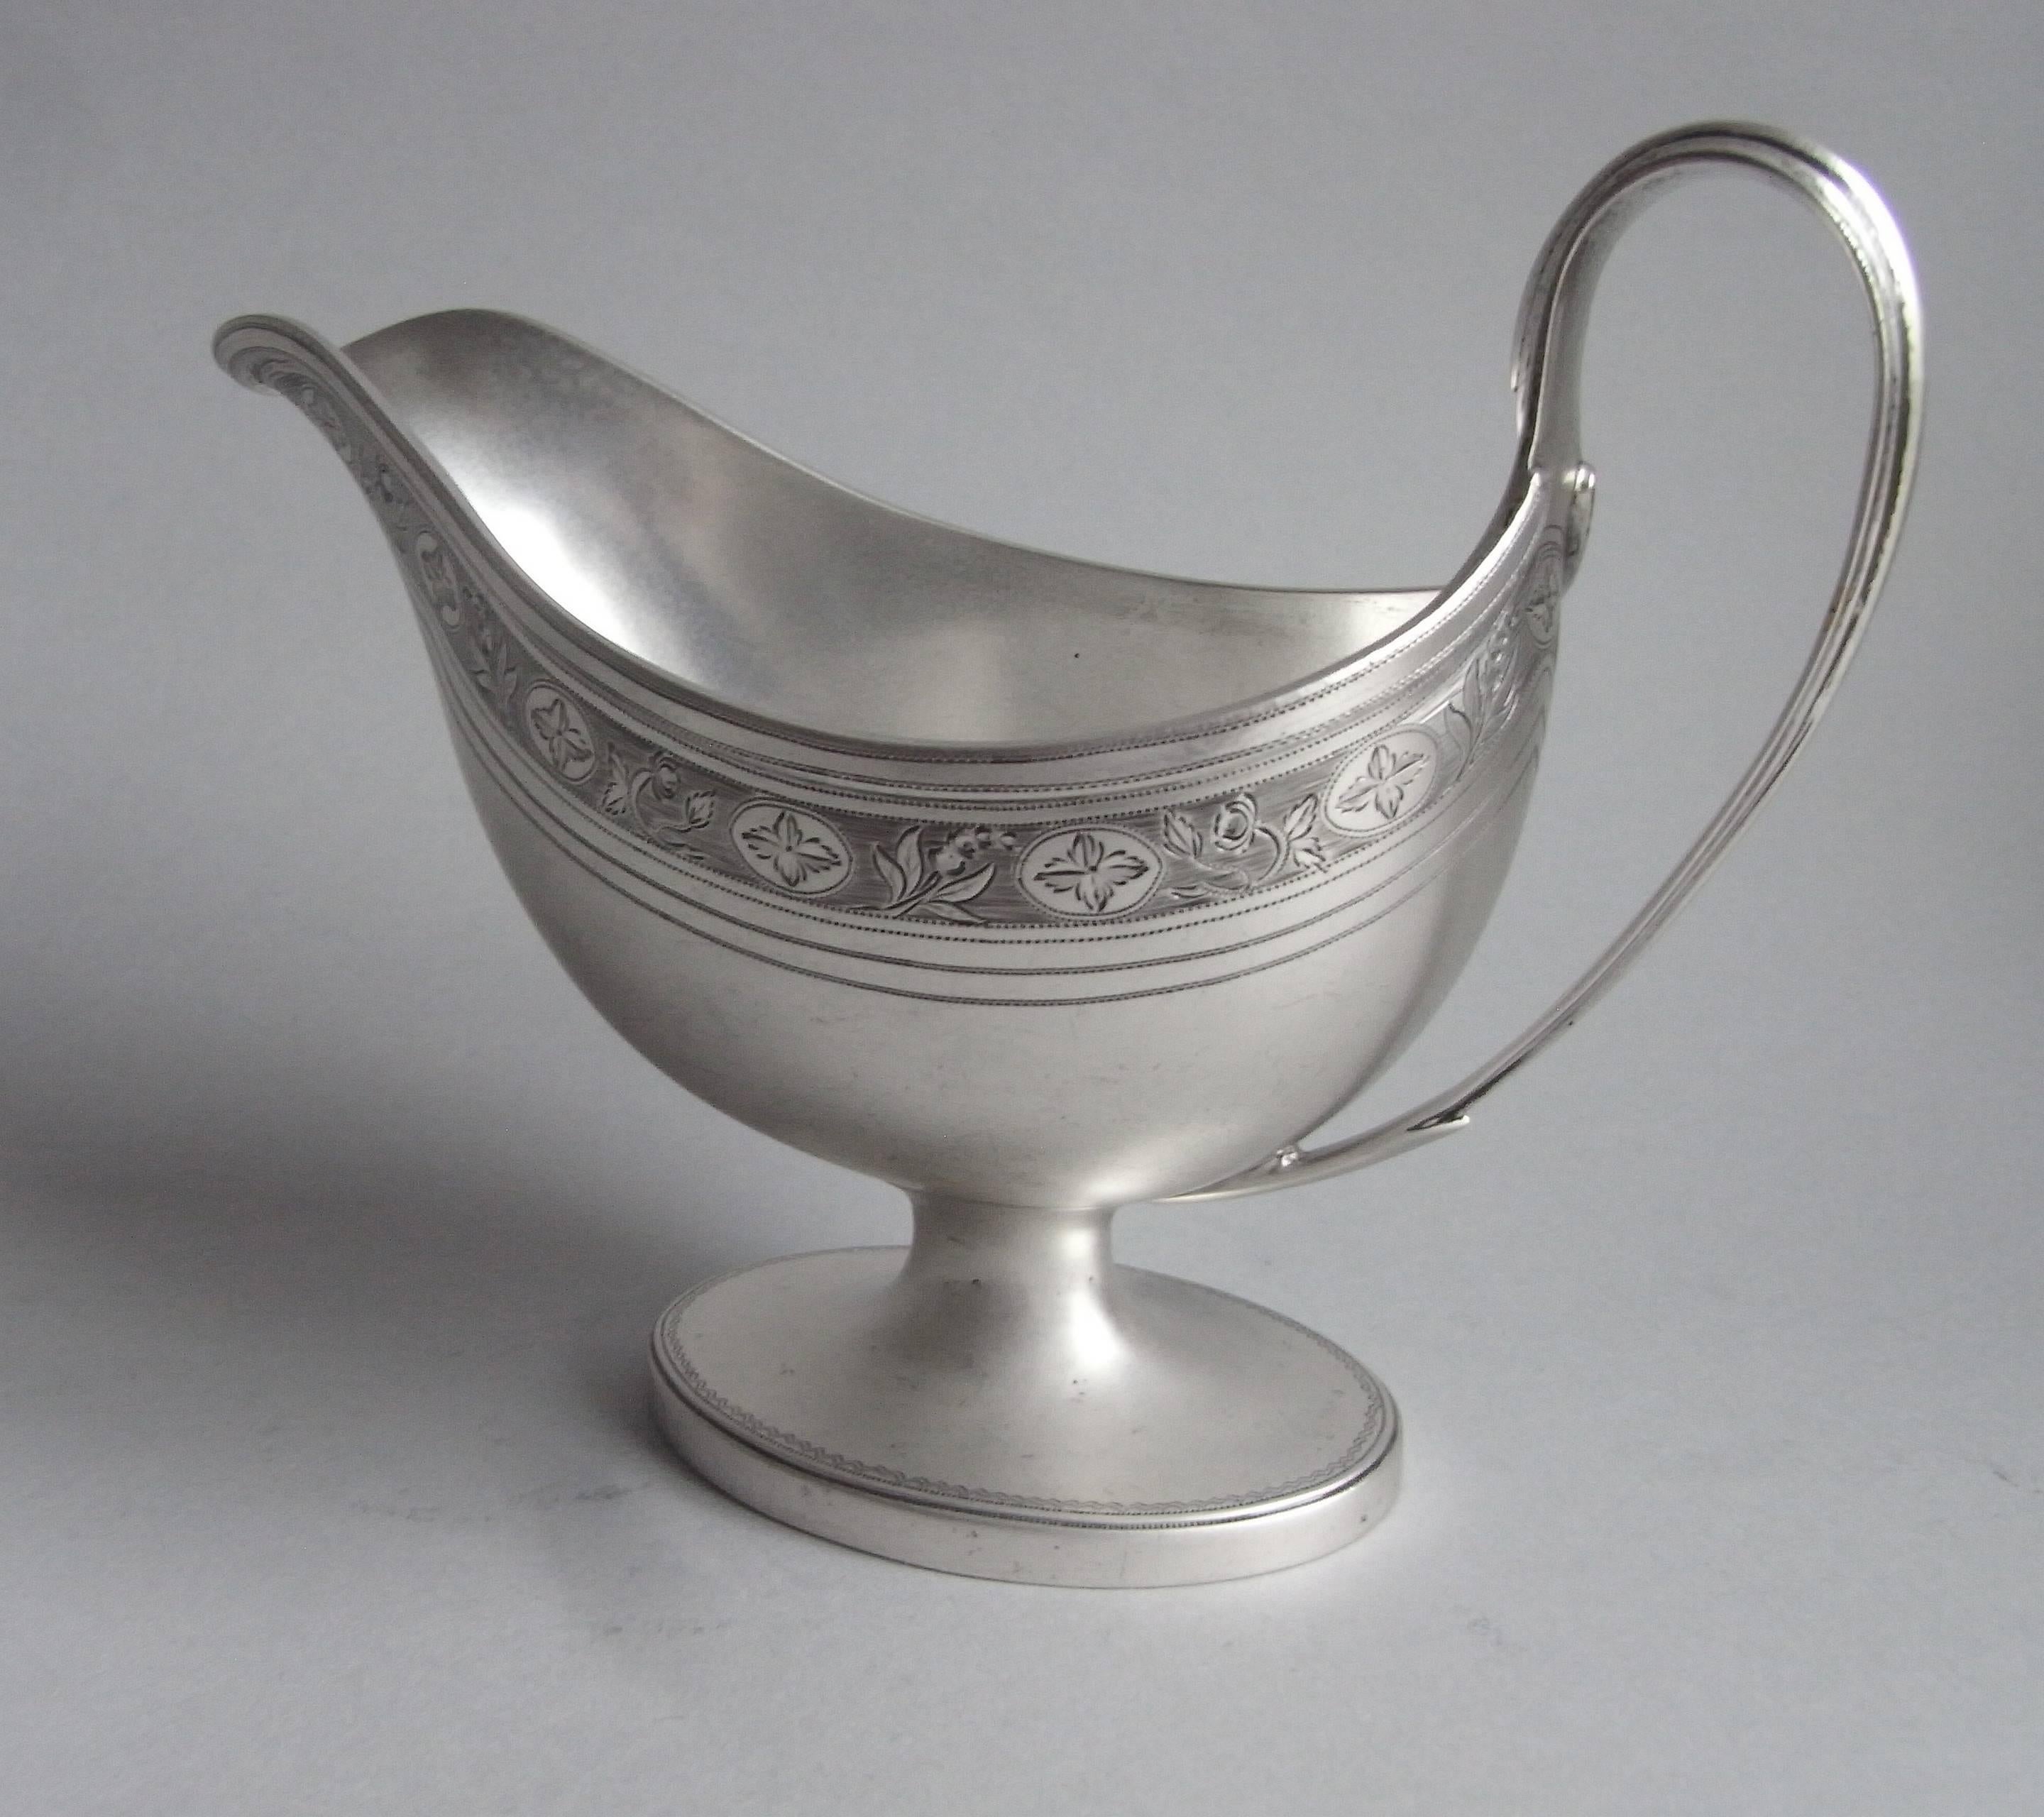 The Sauceboat stands on an oval collet foot engraved with an outer prick dot band. The main body is of a good size and has an everted prick dot rim. The upper section of the main body is also engraved with a beautiful band of foliate motifs and